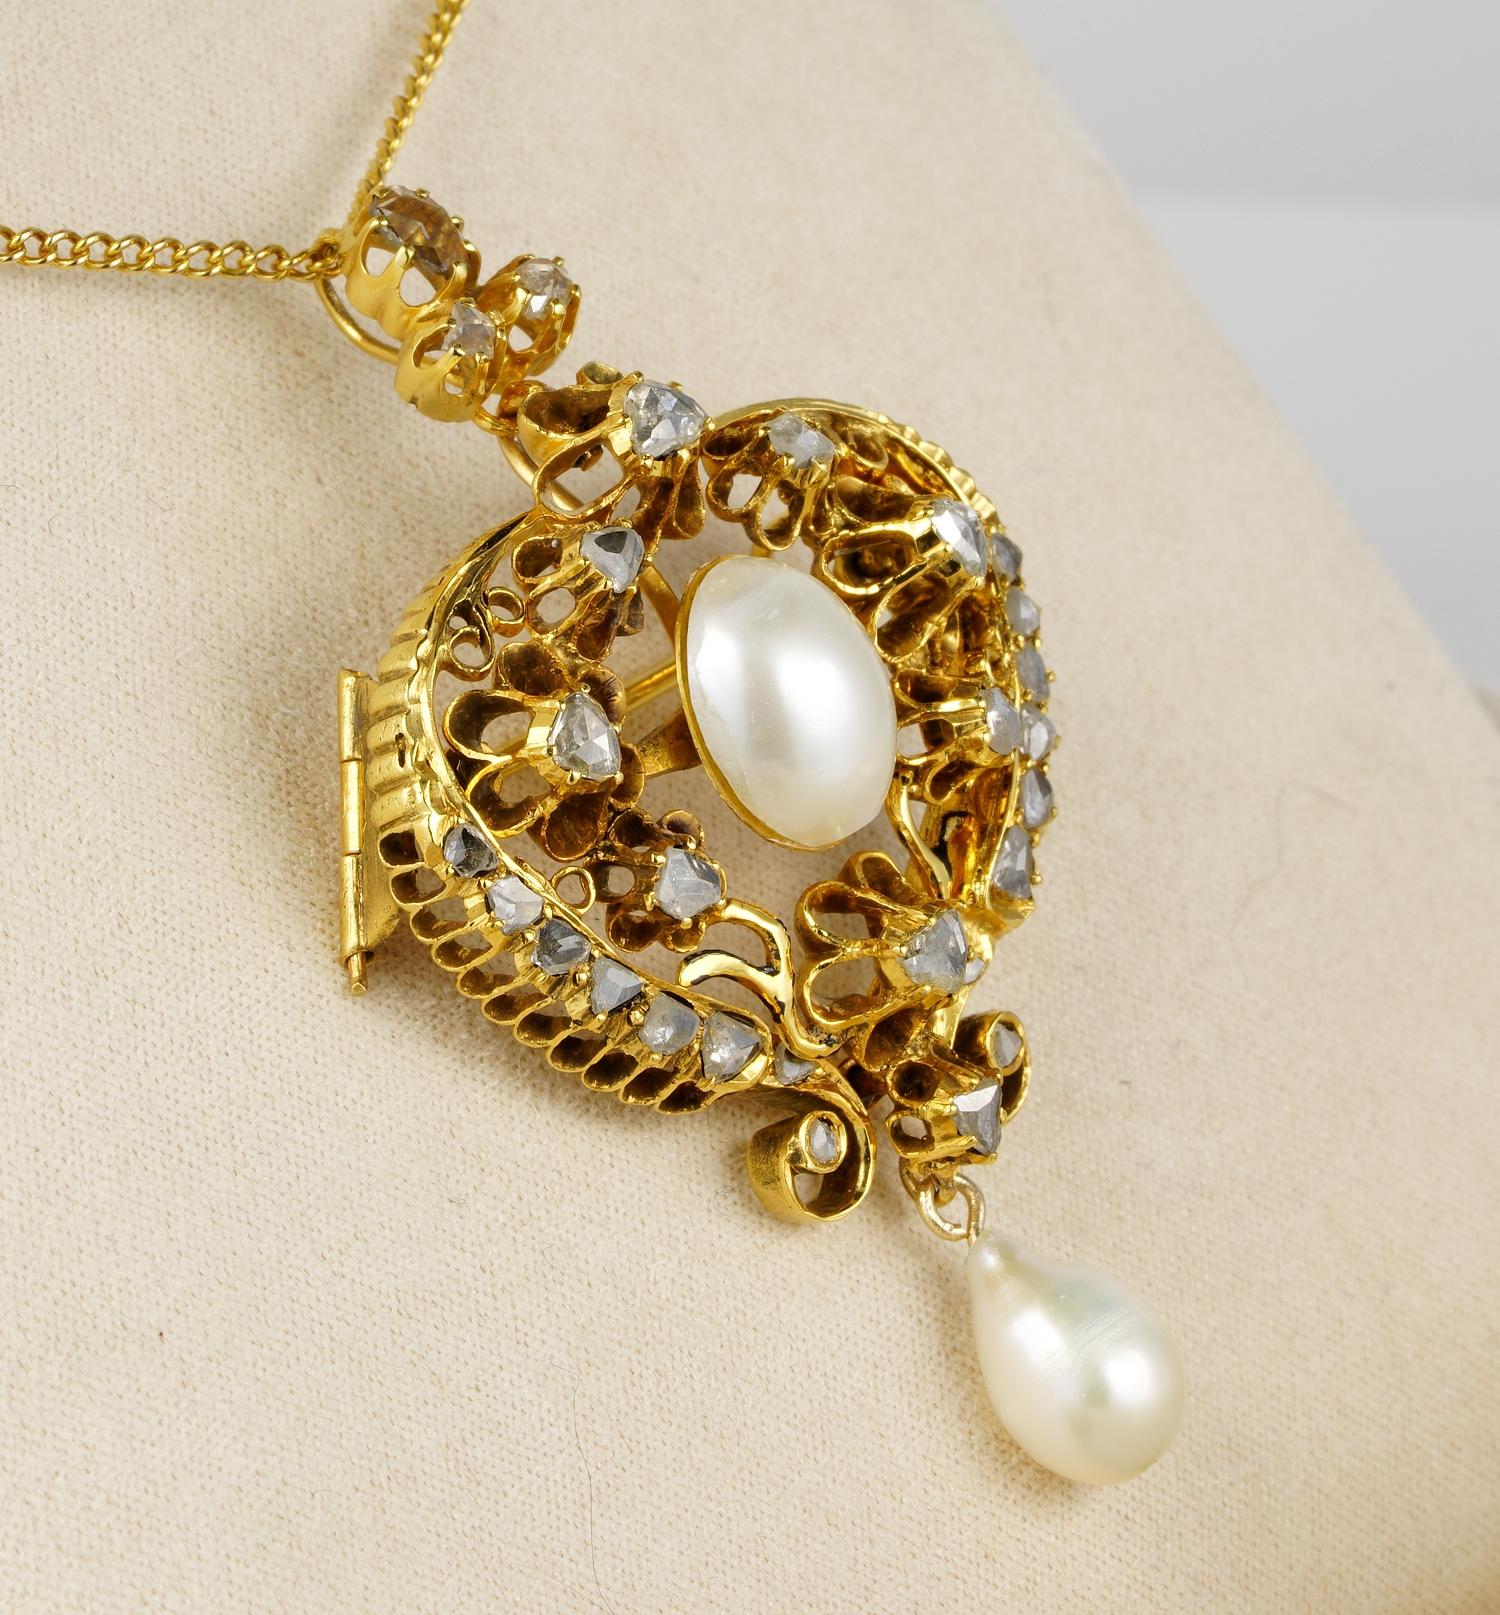 This beautiful pendant chain necklace is late Georgian period, 1840 ca
Hand crafted of solid 18 Kt gold in a glorious workmanship
Marvelous in design tailored in a sort of heart shape with an inside buttercup floret Diamond set encircling the centre